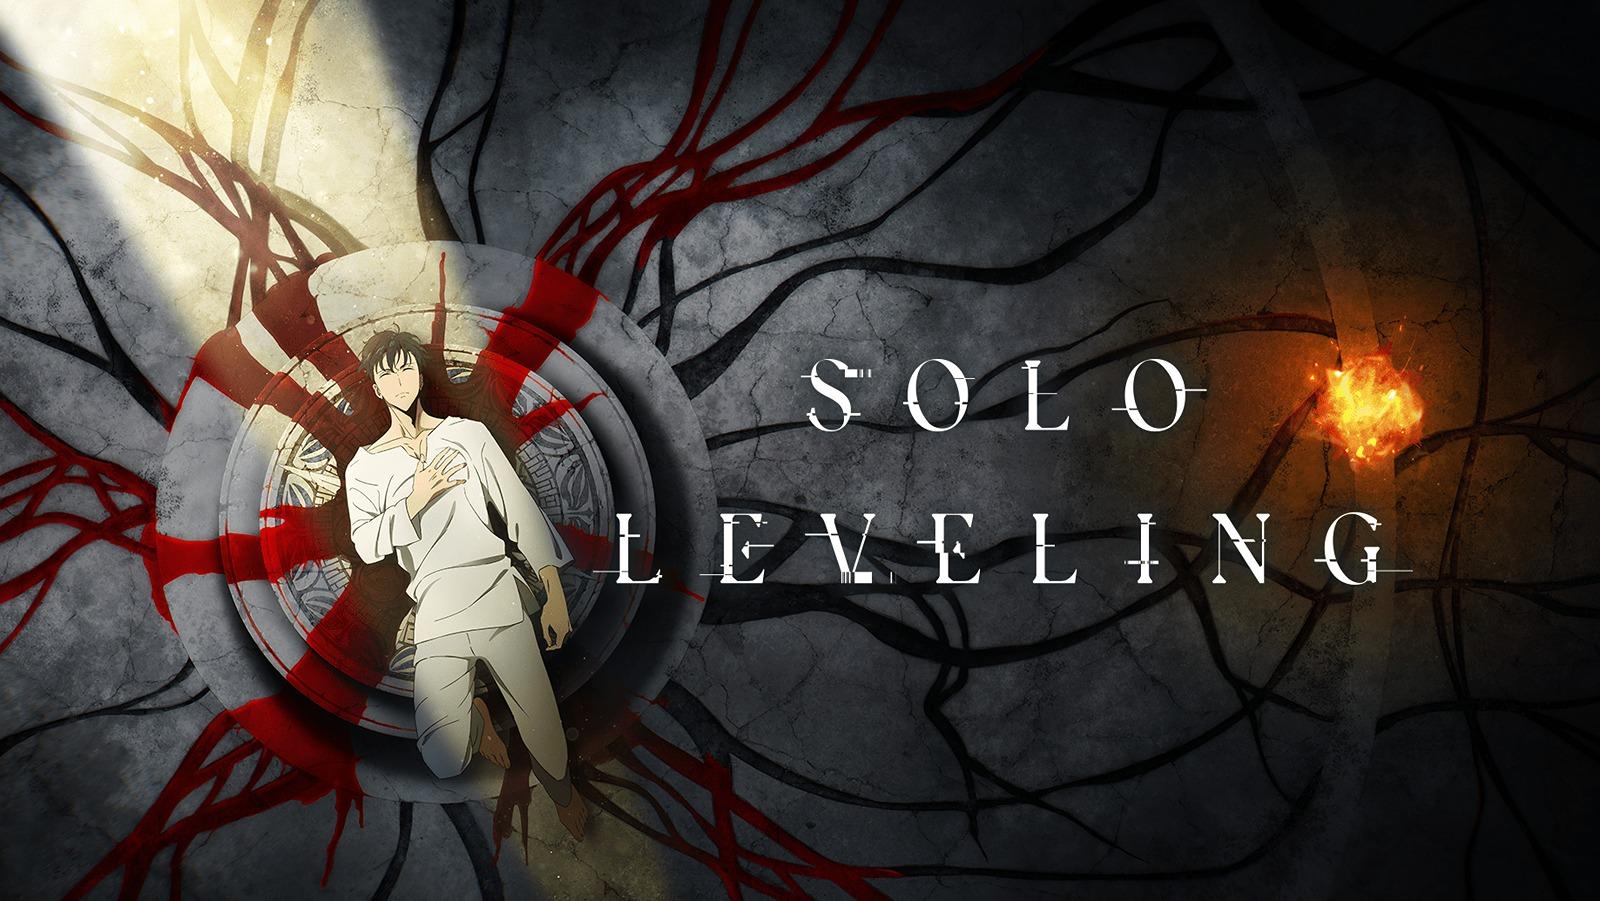 Will There Be a Solo Leveling Season 2 Release Date & Is It Coming Out?